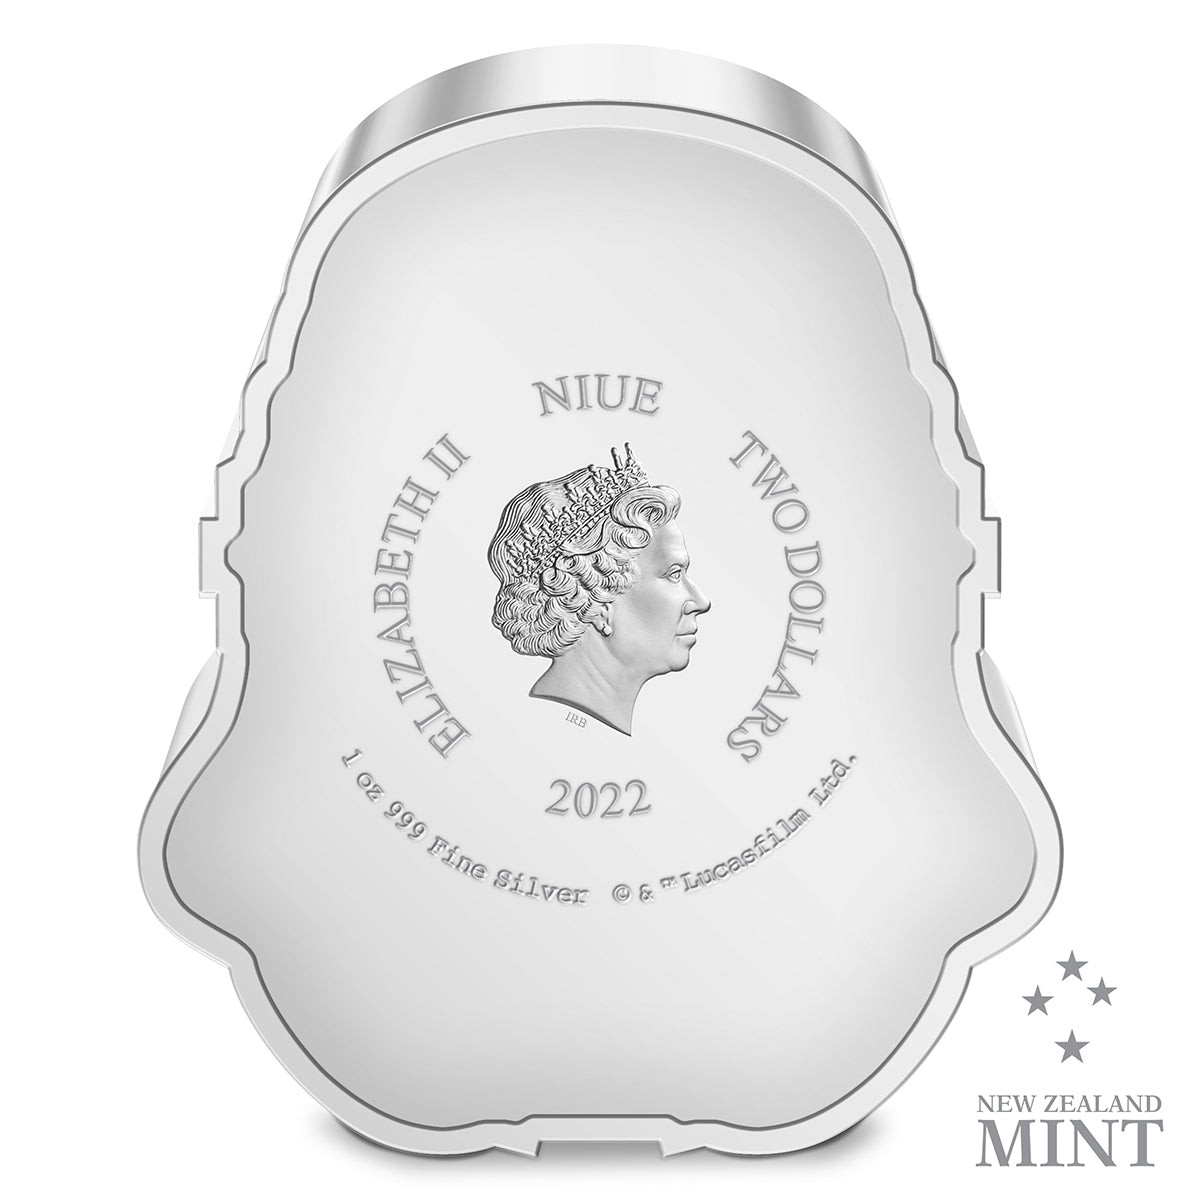 Niue Mint 2021 Faces of the Empire Imperial Patrol Trooper 1 oz Silver Coin